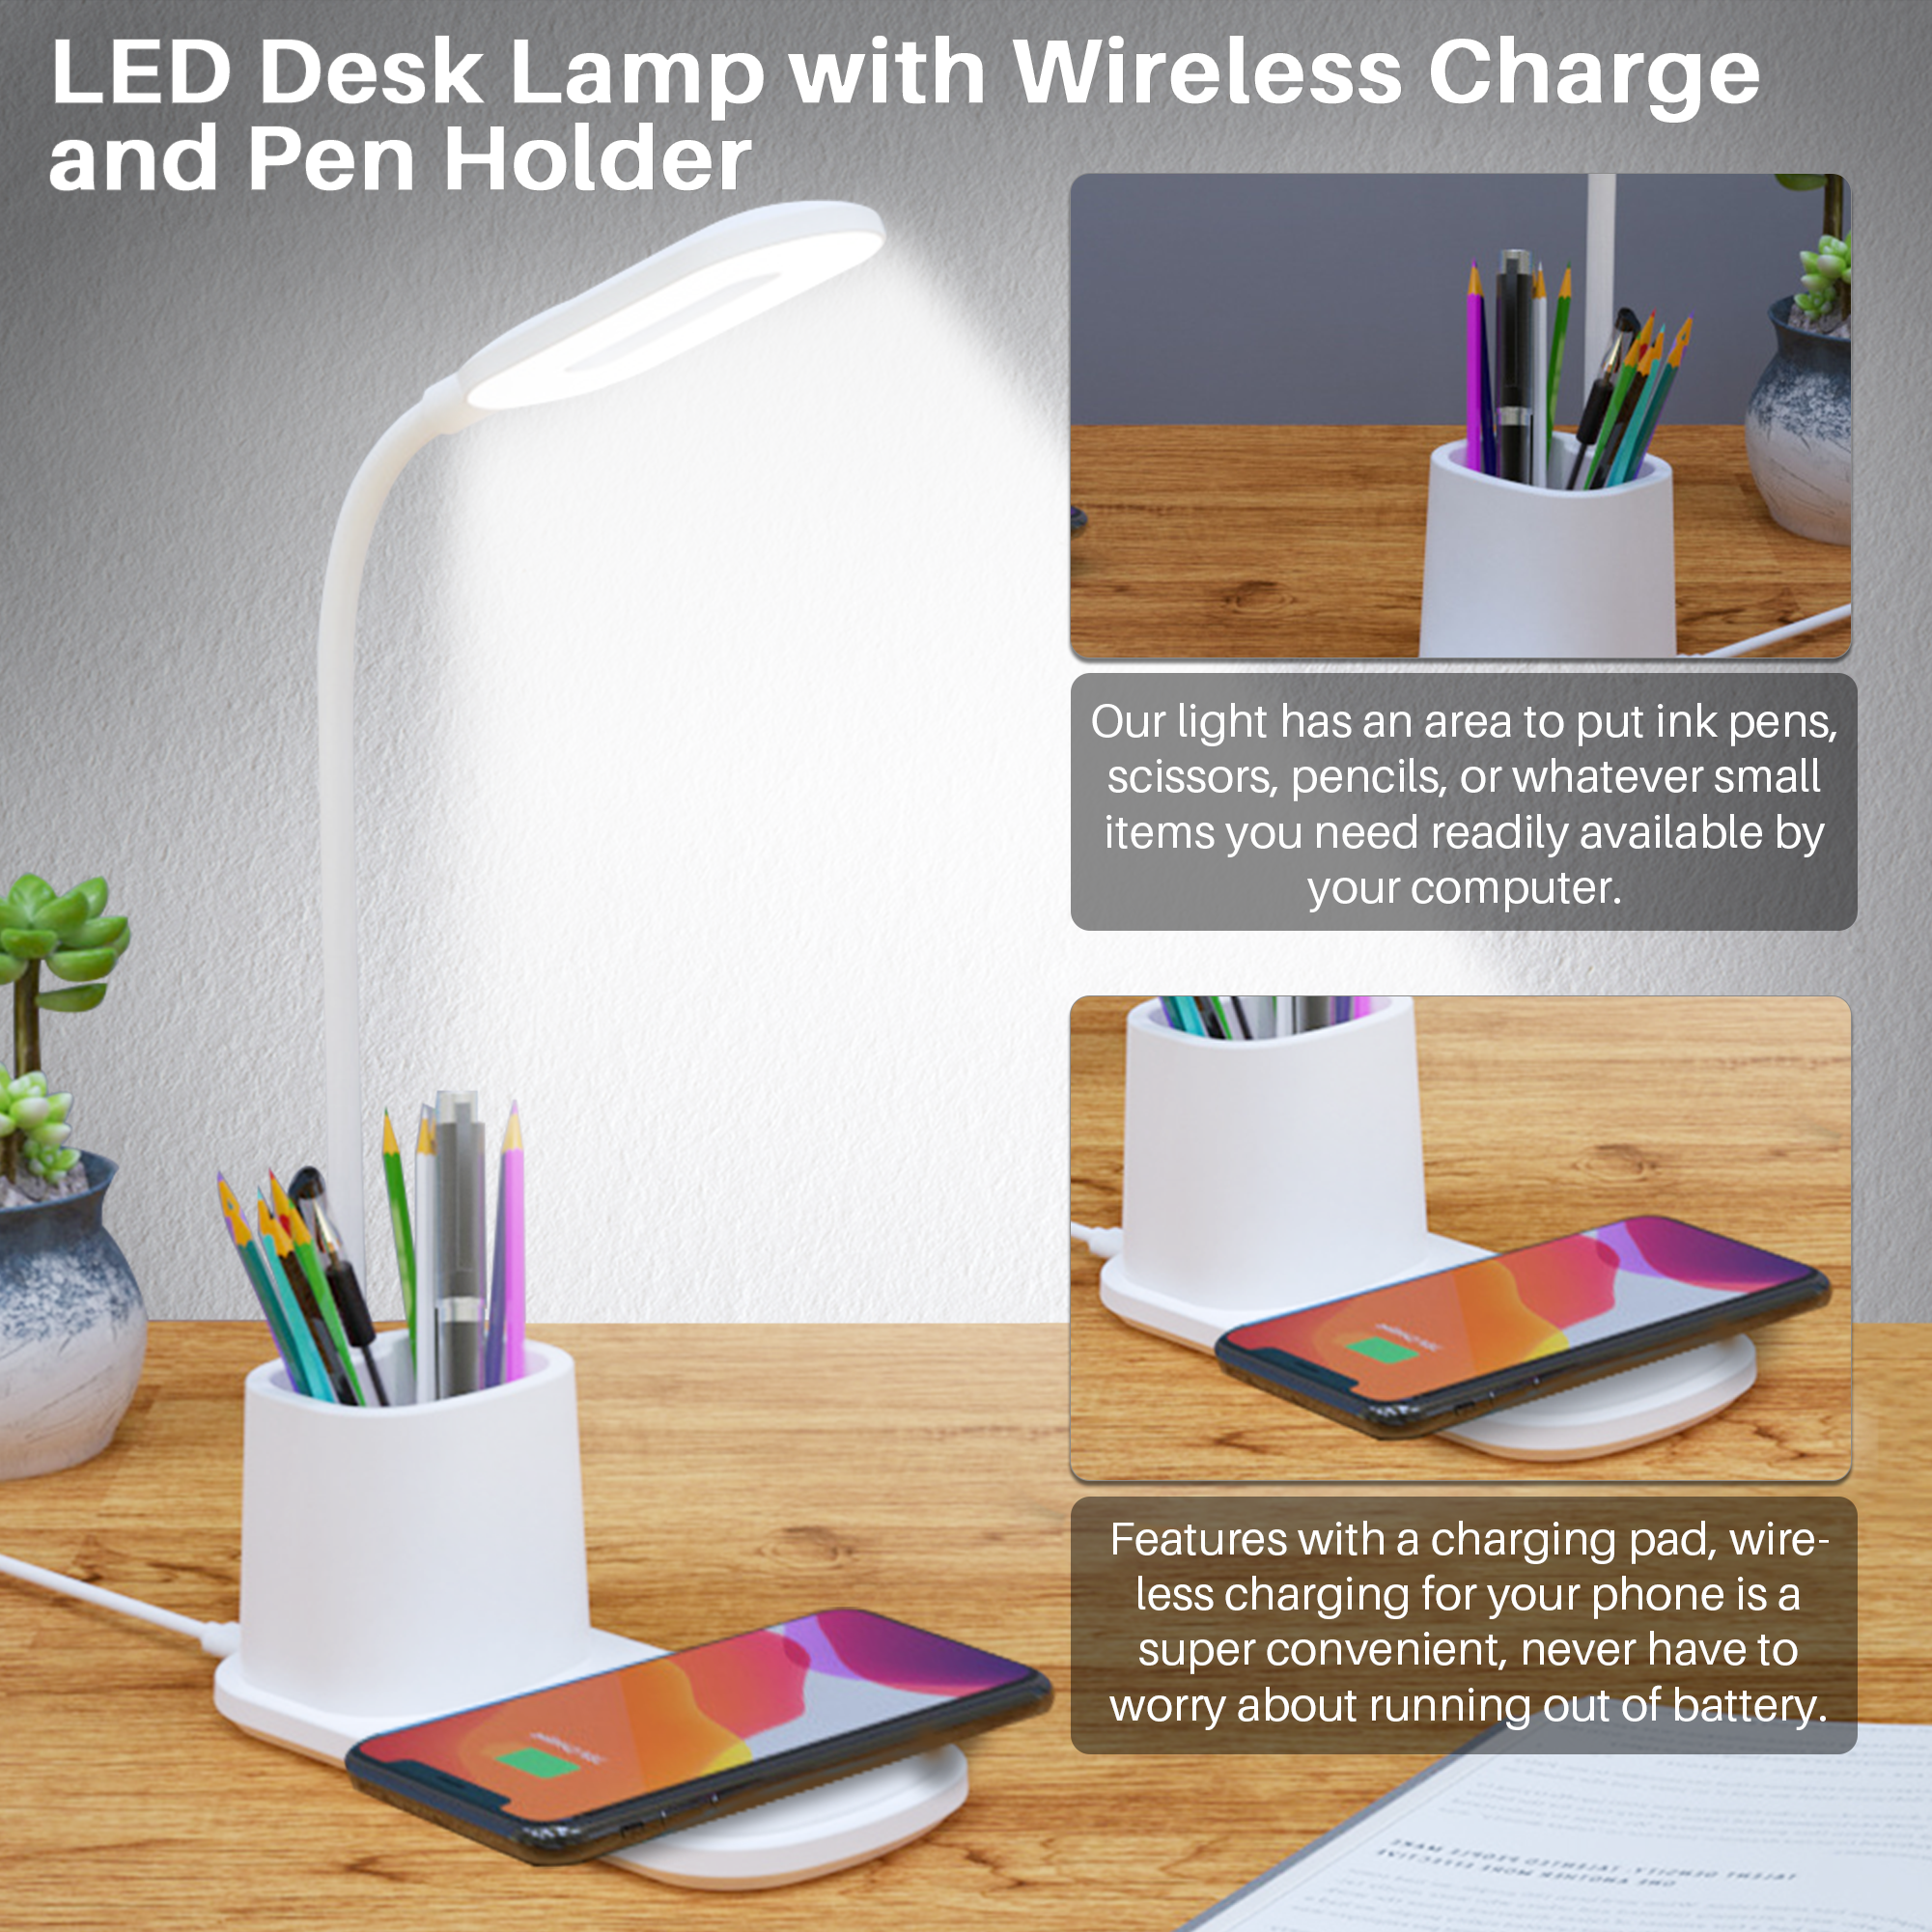 BCOOSS Led Desk Lamp for an Office in Home with Pen Holder and Wireless Charger- 3 Modes Dimmable LED Table Lamp with Flexible Gooseneck - image 4 of 7